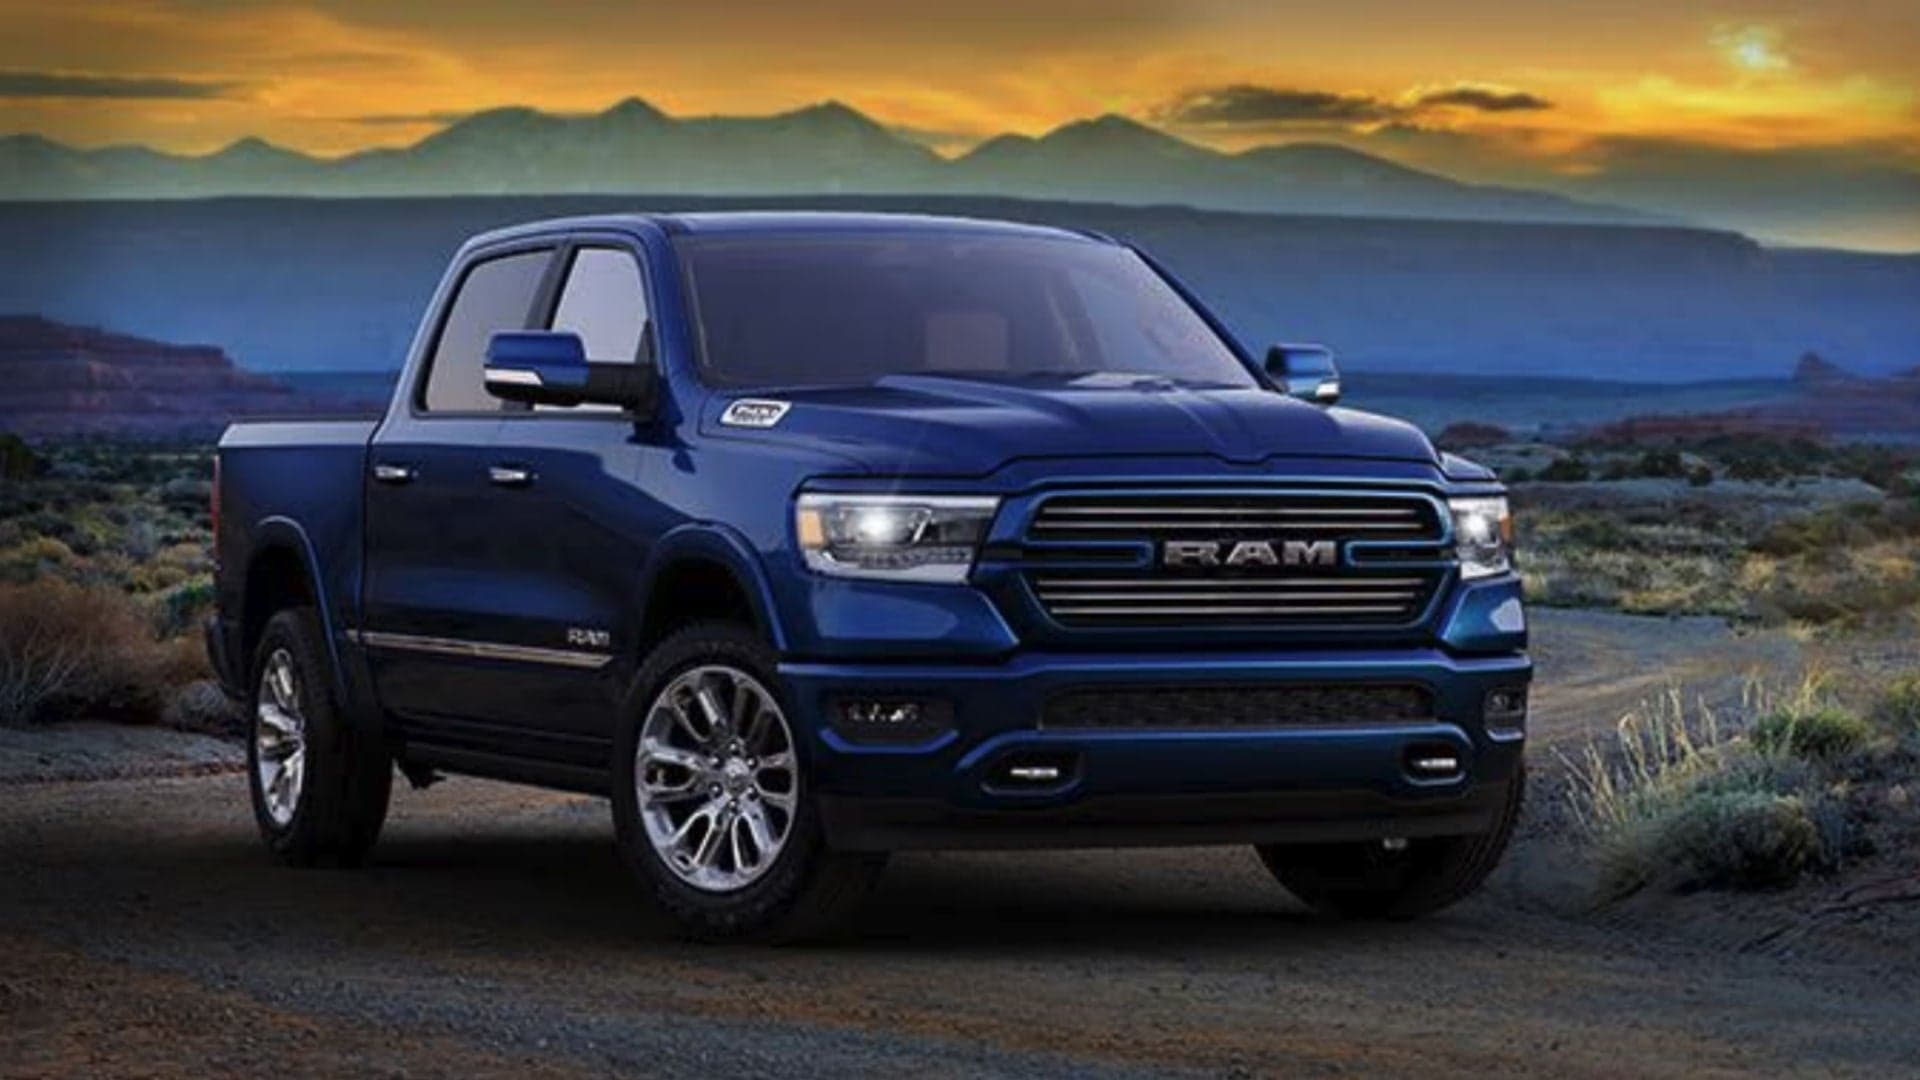 2020 Ram 1500 Laramie Southwest Edition: Yet Another Cowboy-Inspired Fancy Truck